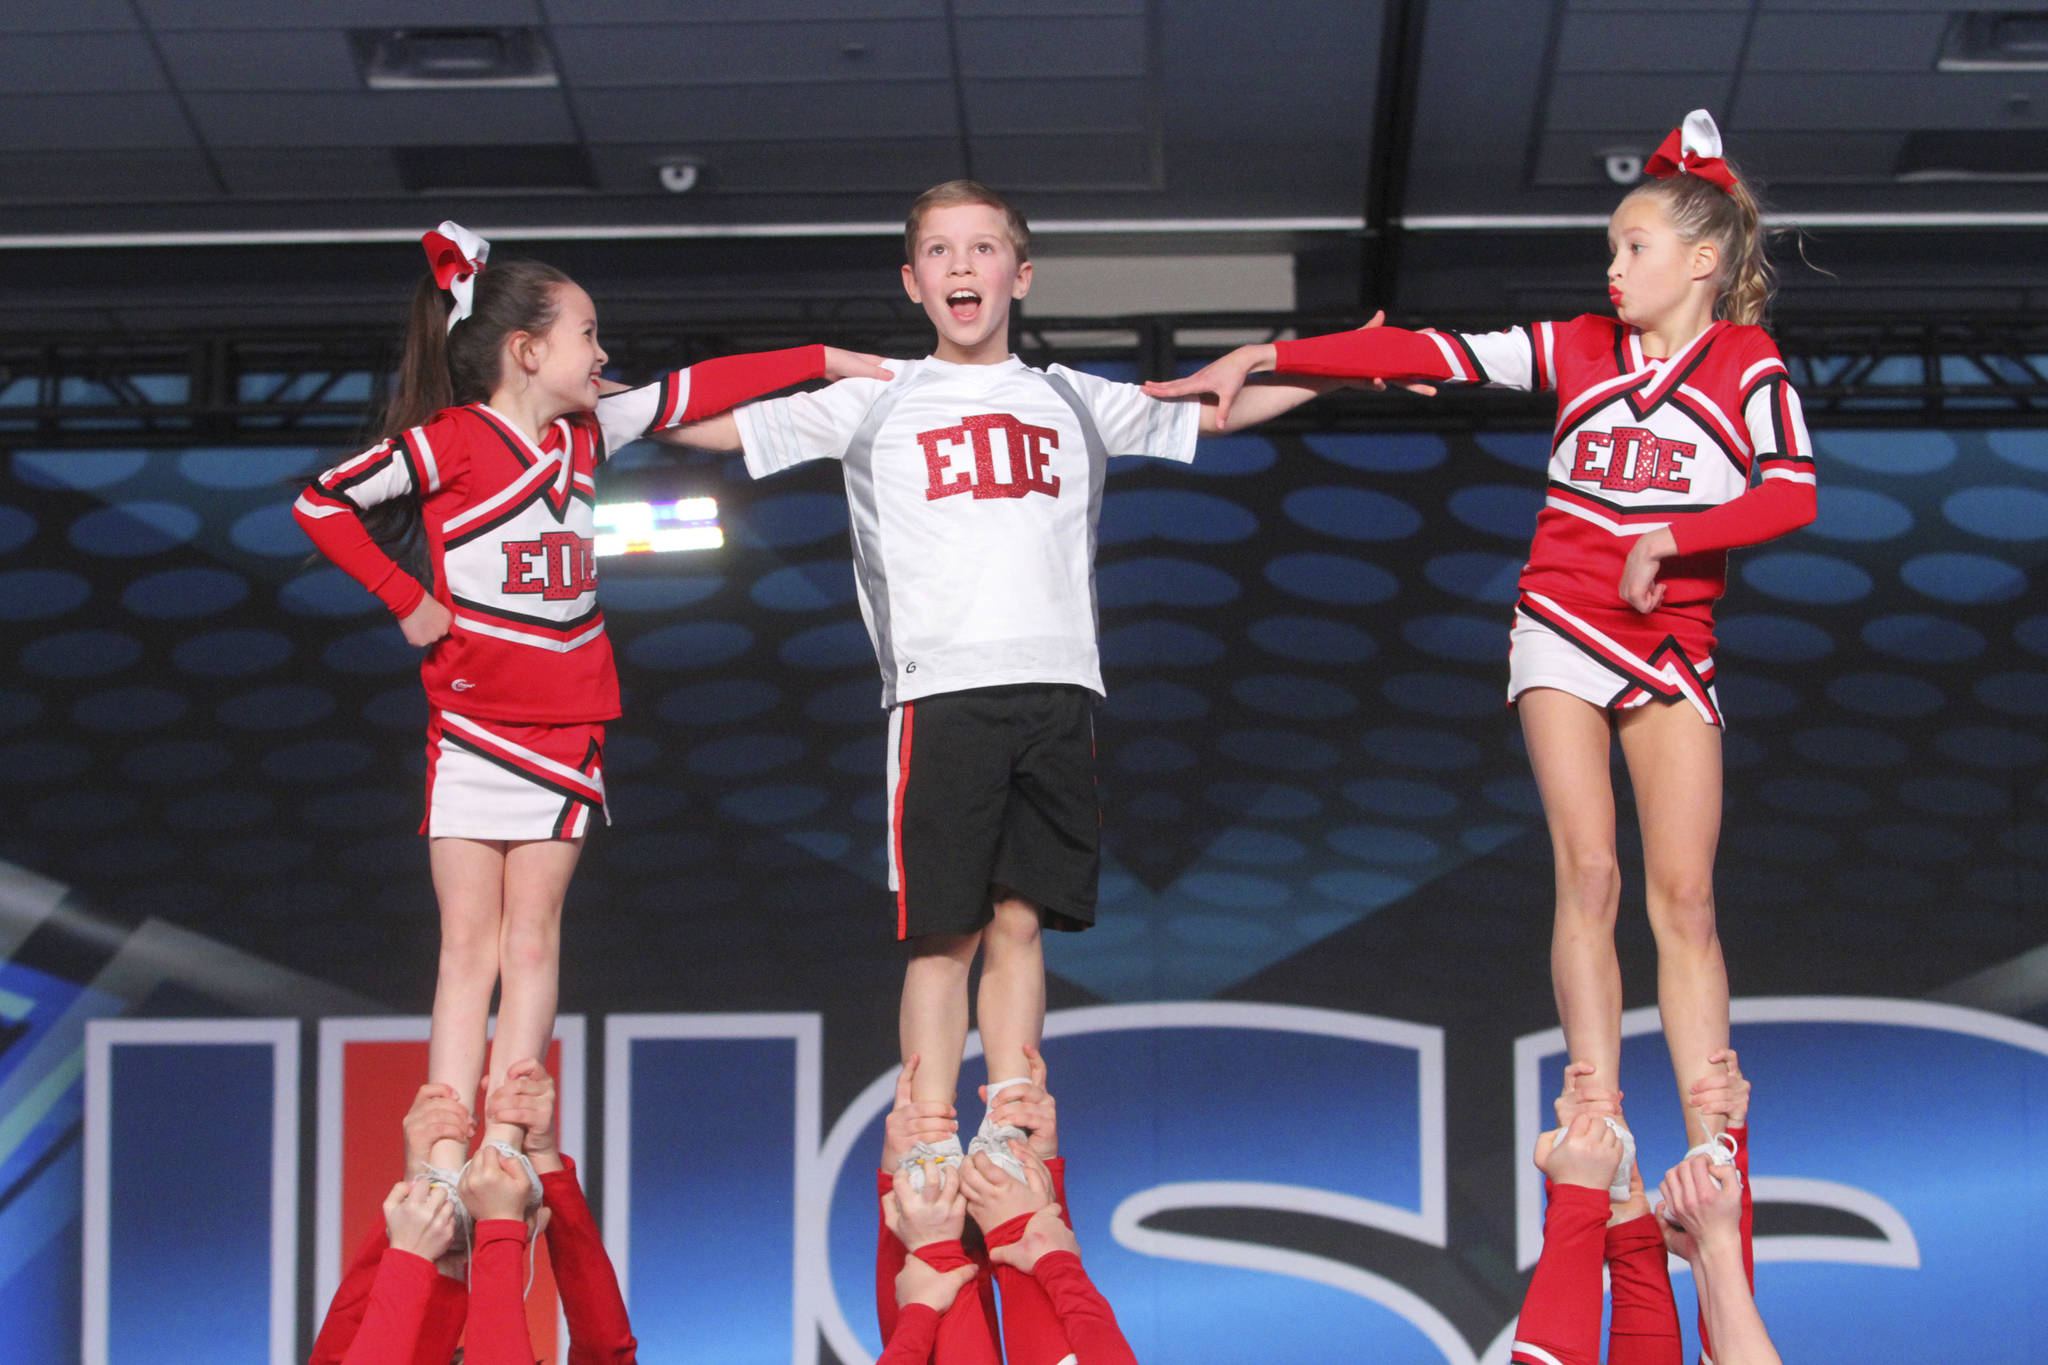 Eastside Dream Elite cheerleaders compete at a competition last February. Photo courtesy of Anne Christiansen